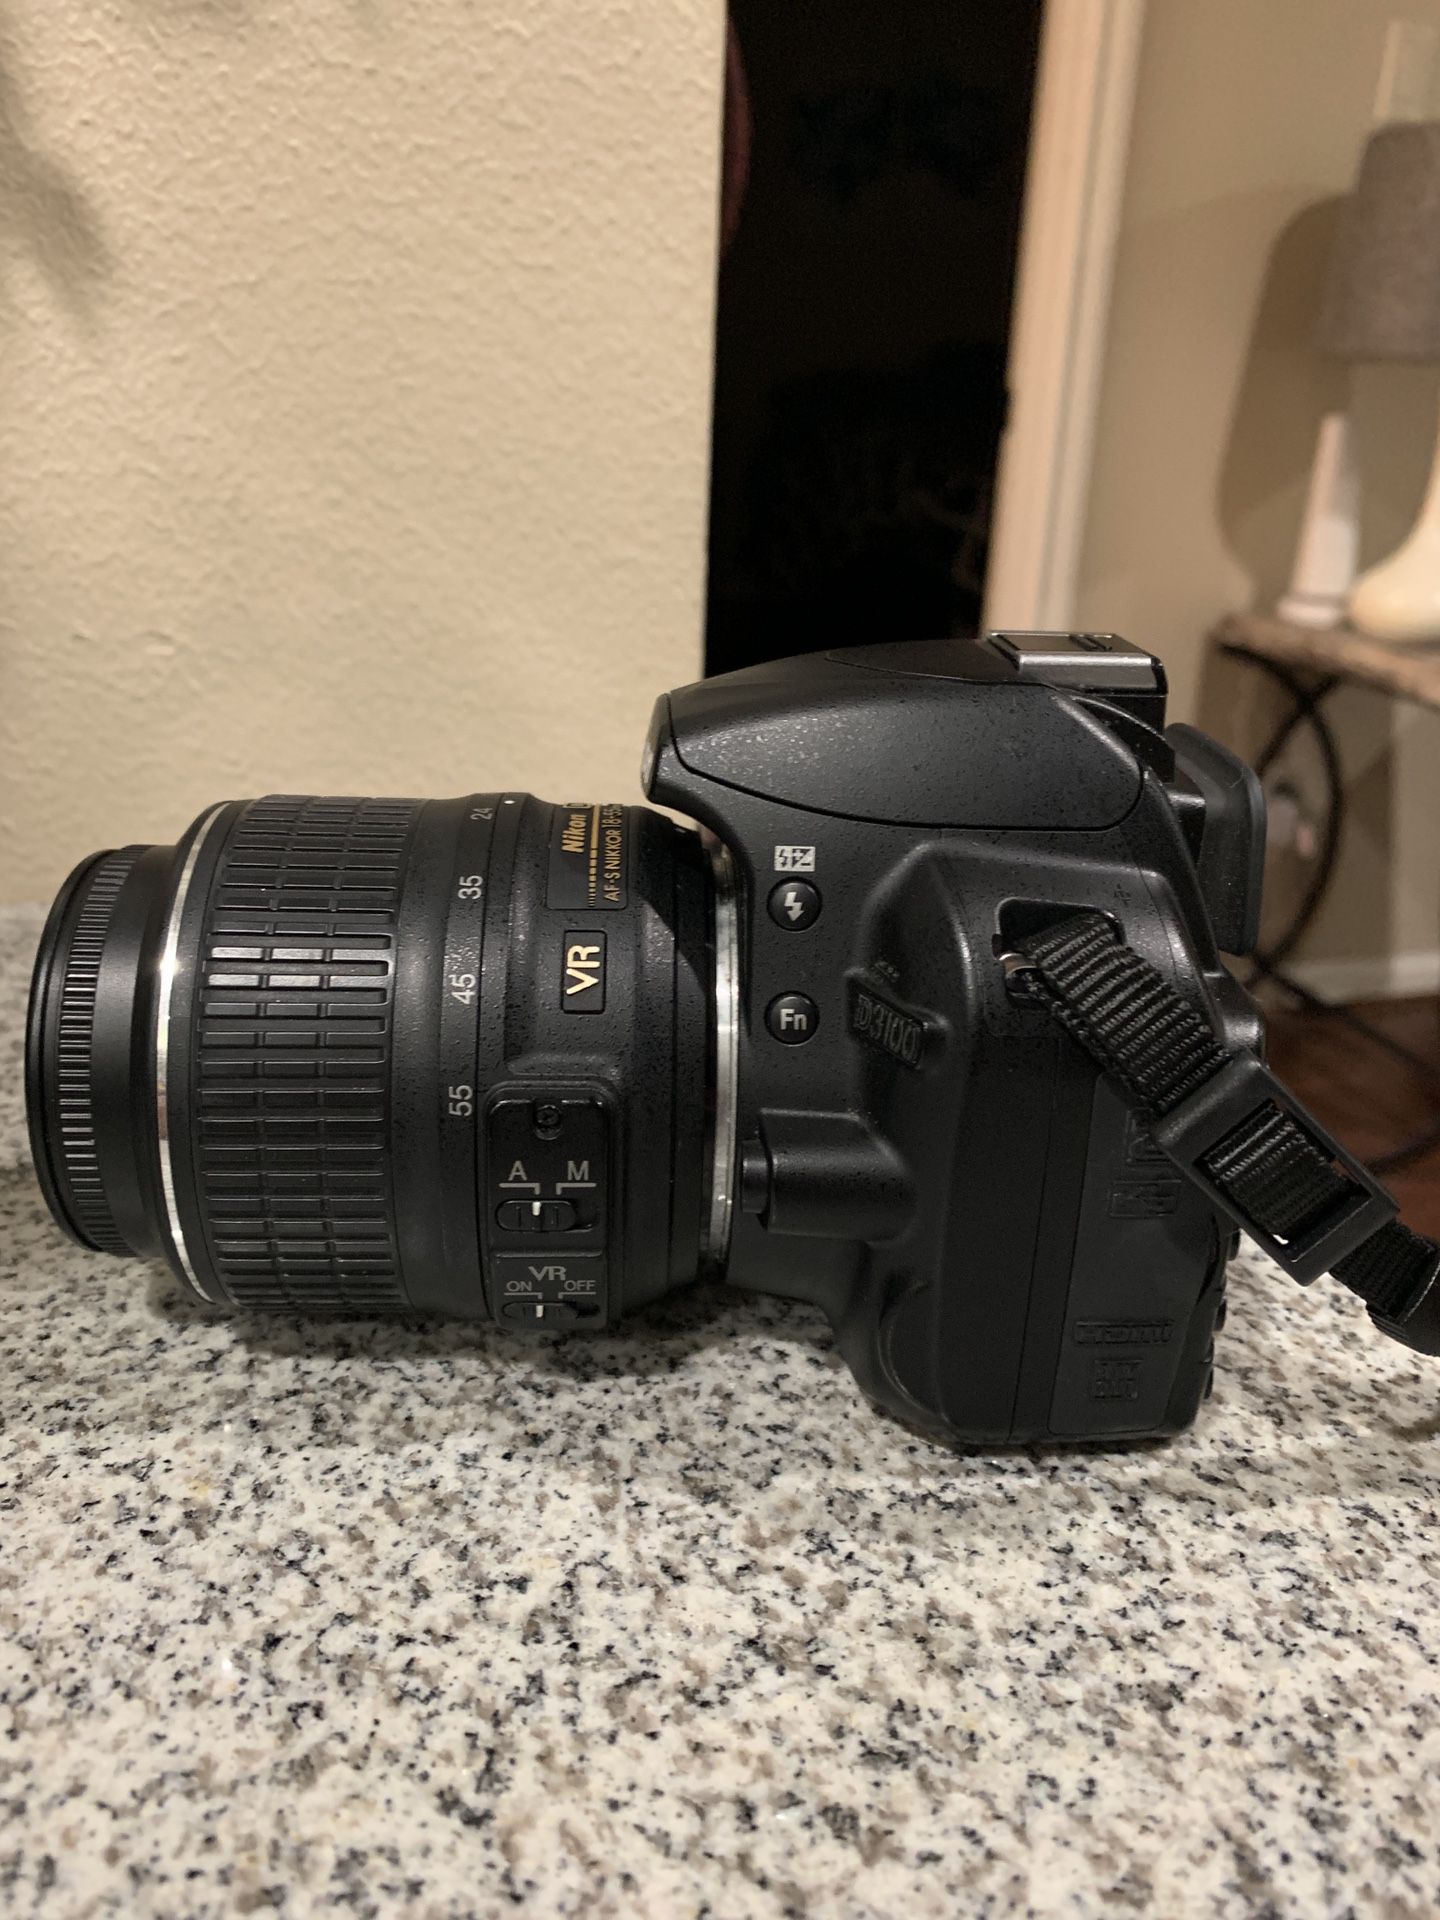 Nikon D3100 with 2 lenses bag and accessories